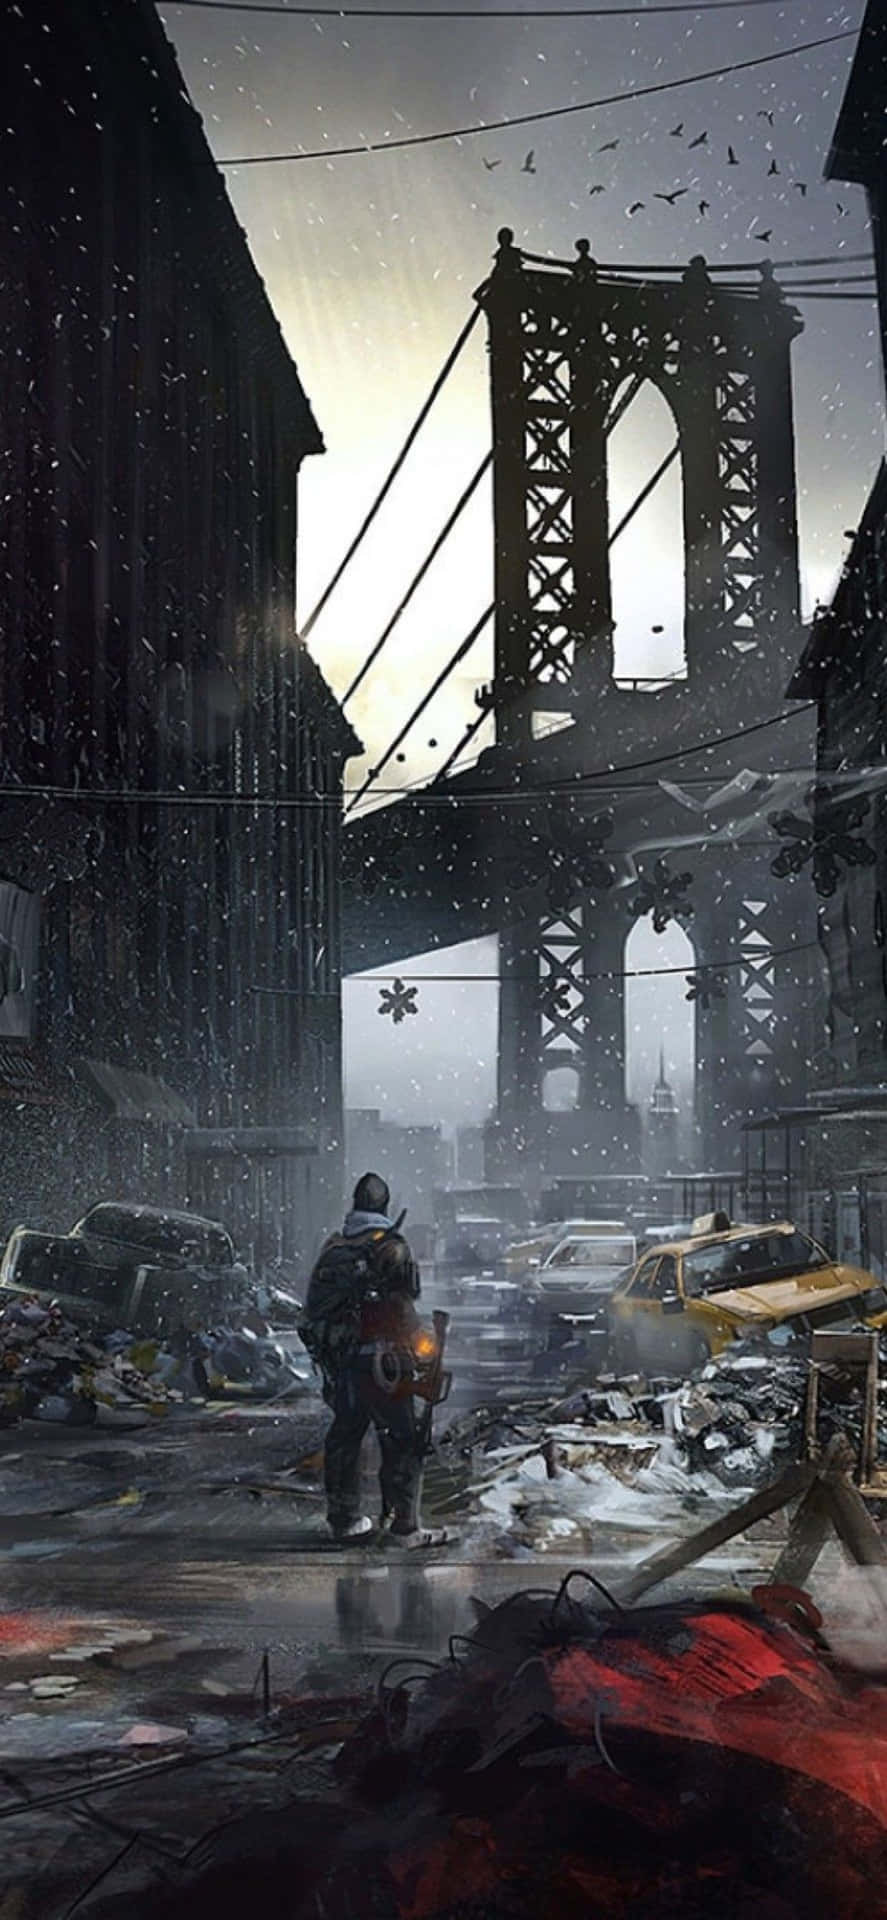 The Division - Hd Wallpaper